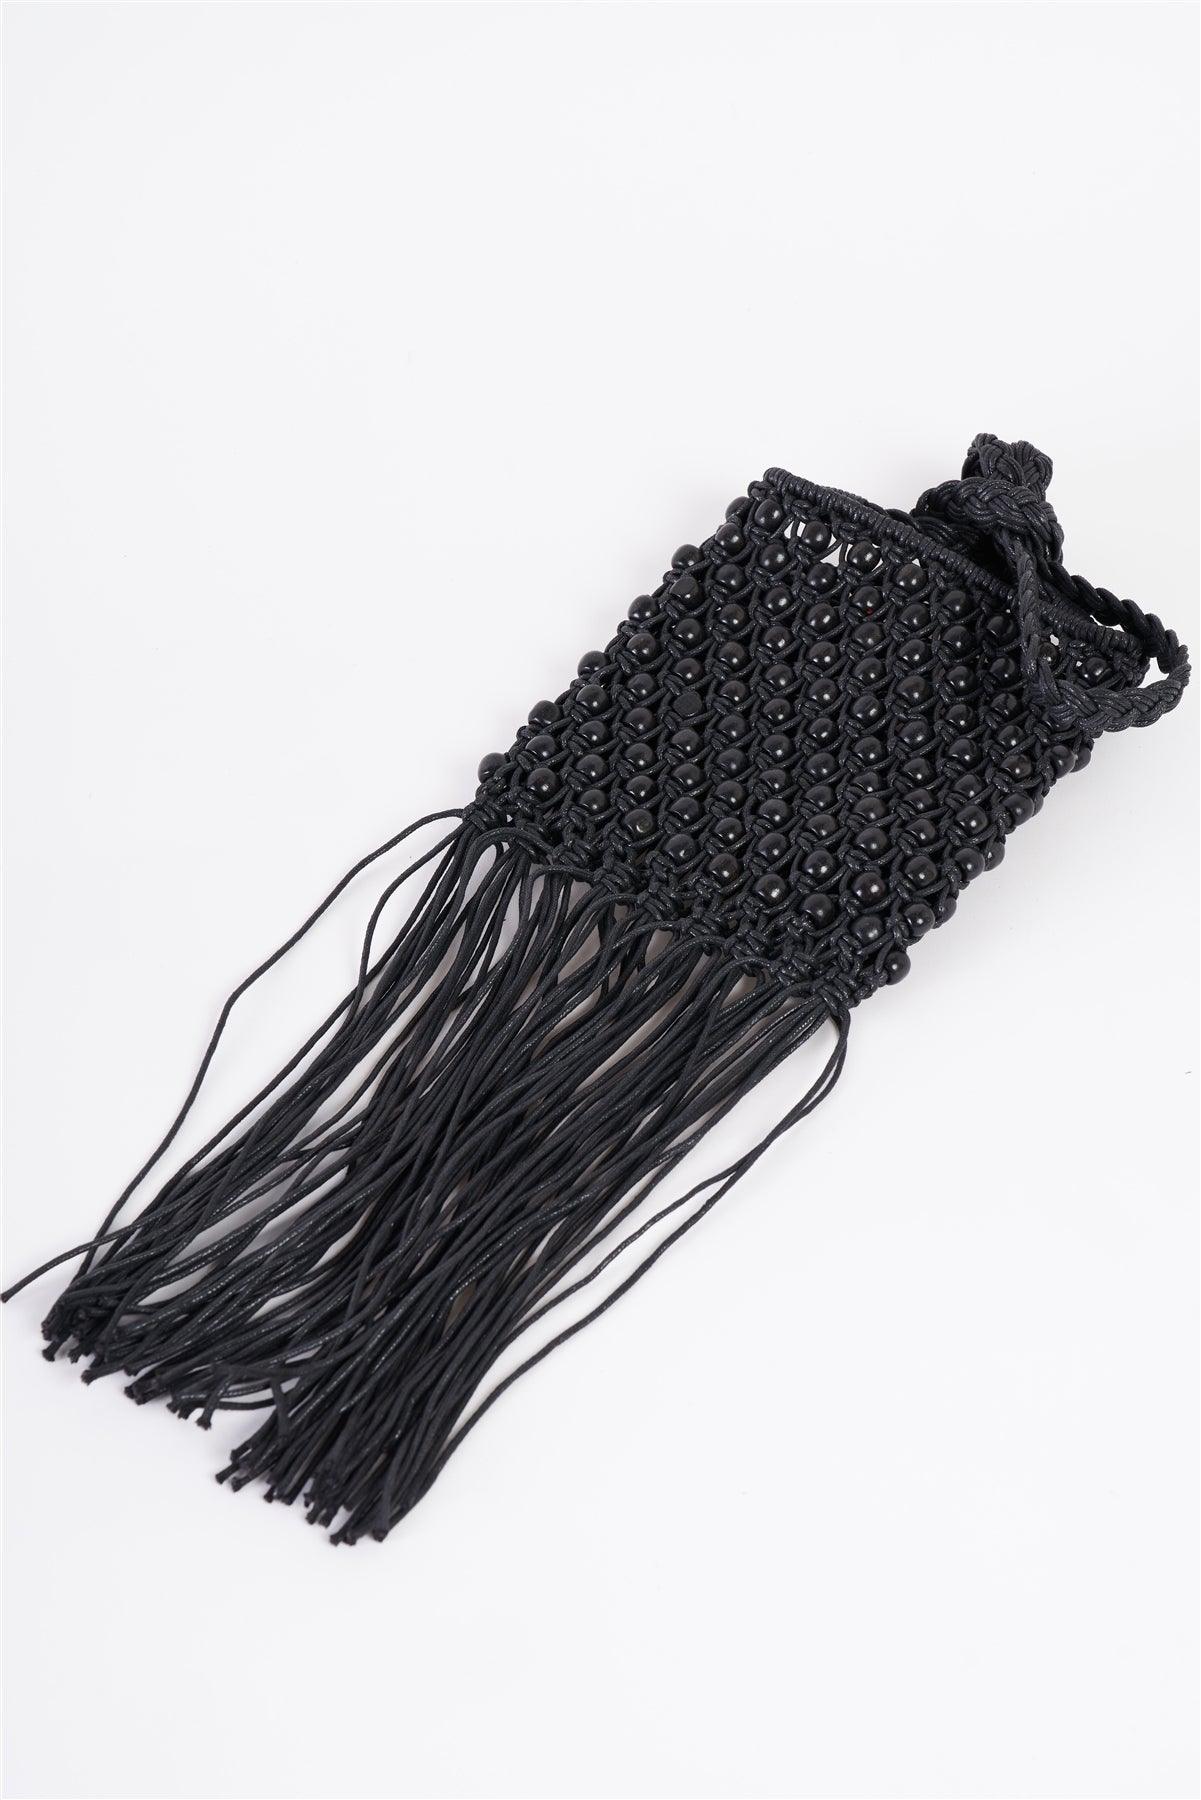 Black Net Cable Fringe Wooden Beads Braided Crossbody Bag /3 Bags